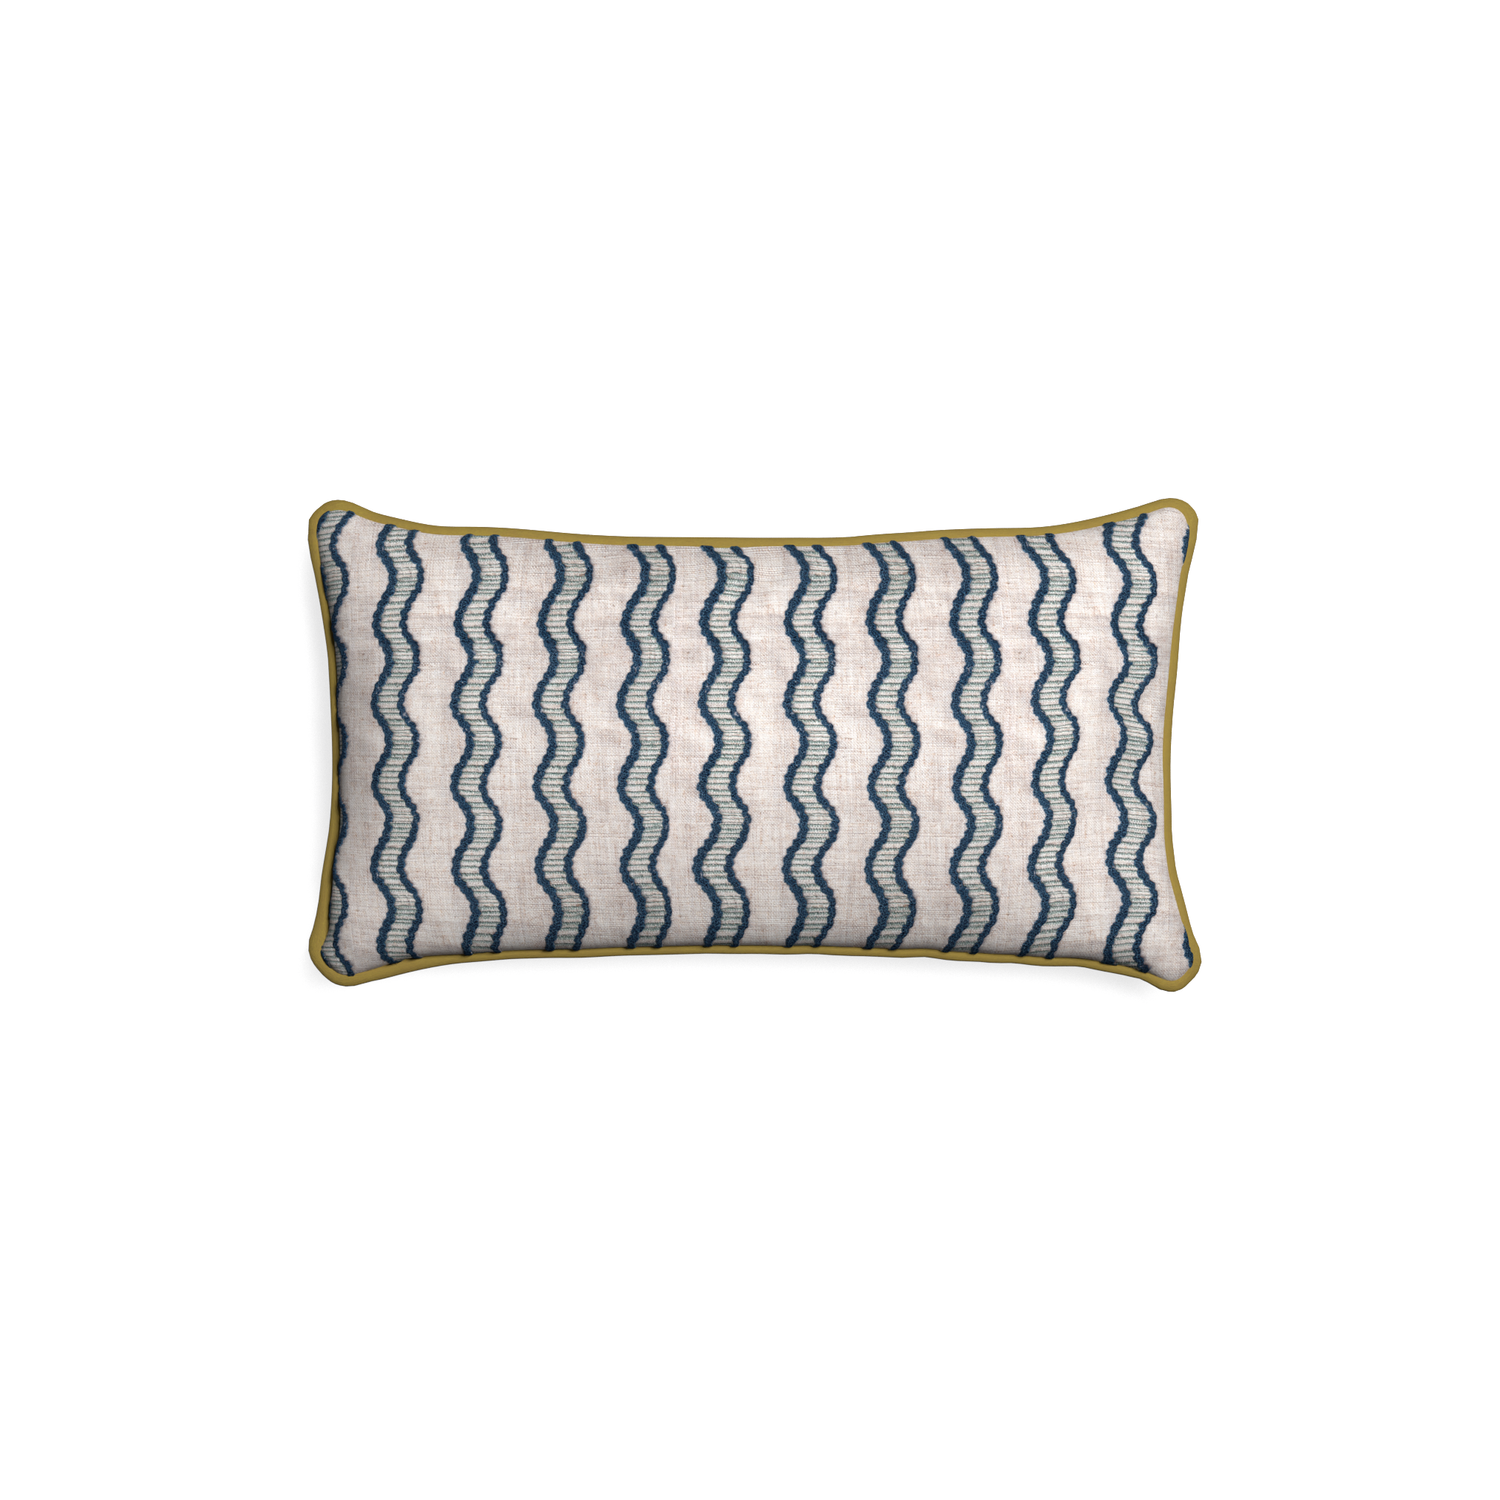 Petite-lumbar beatrice custom embroidered wavepillow with c piping on white background